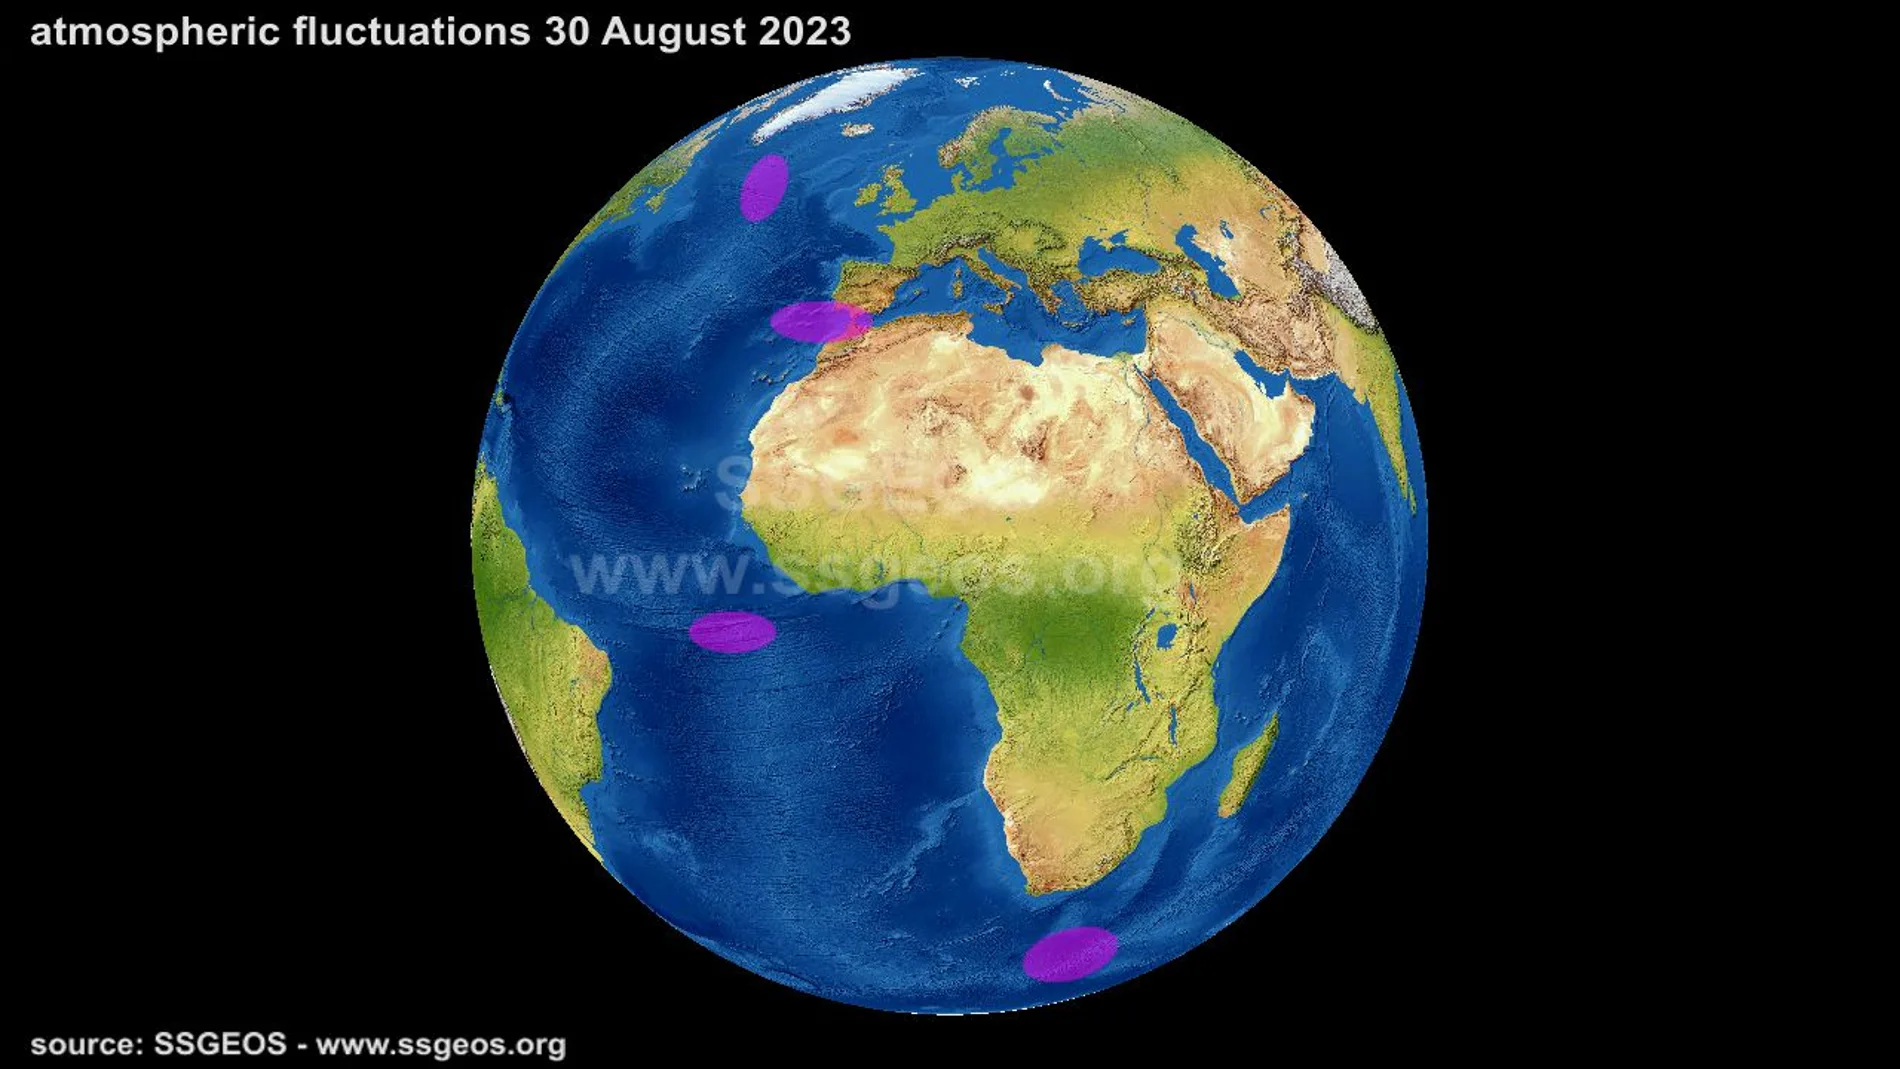 Atmospheric fluctuations 30 August 2023